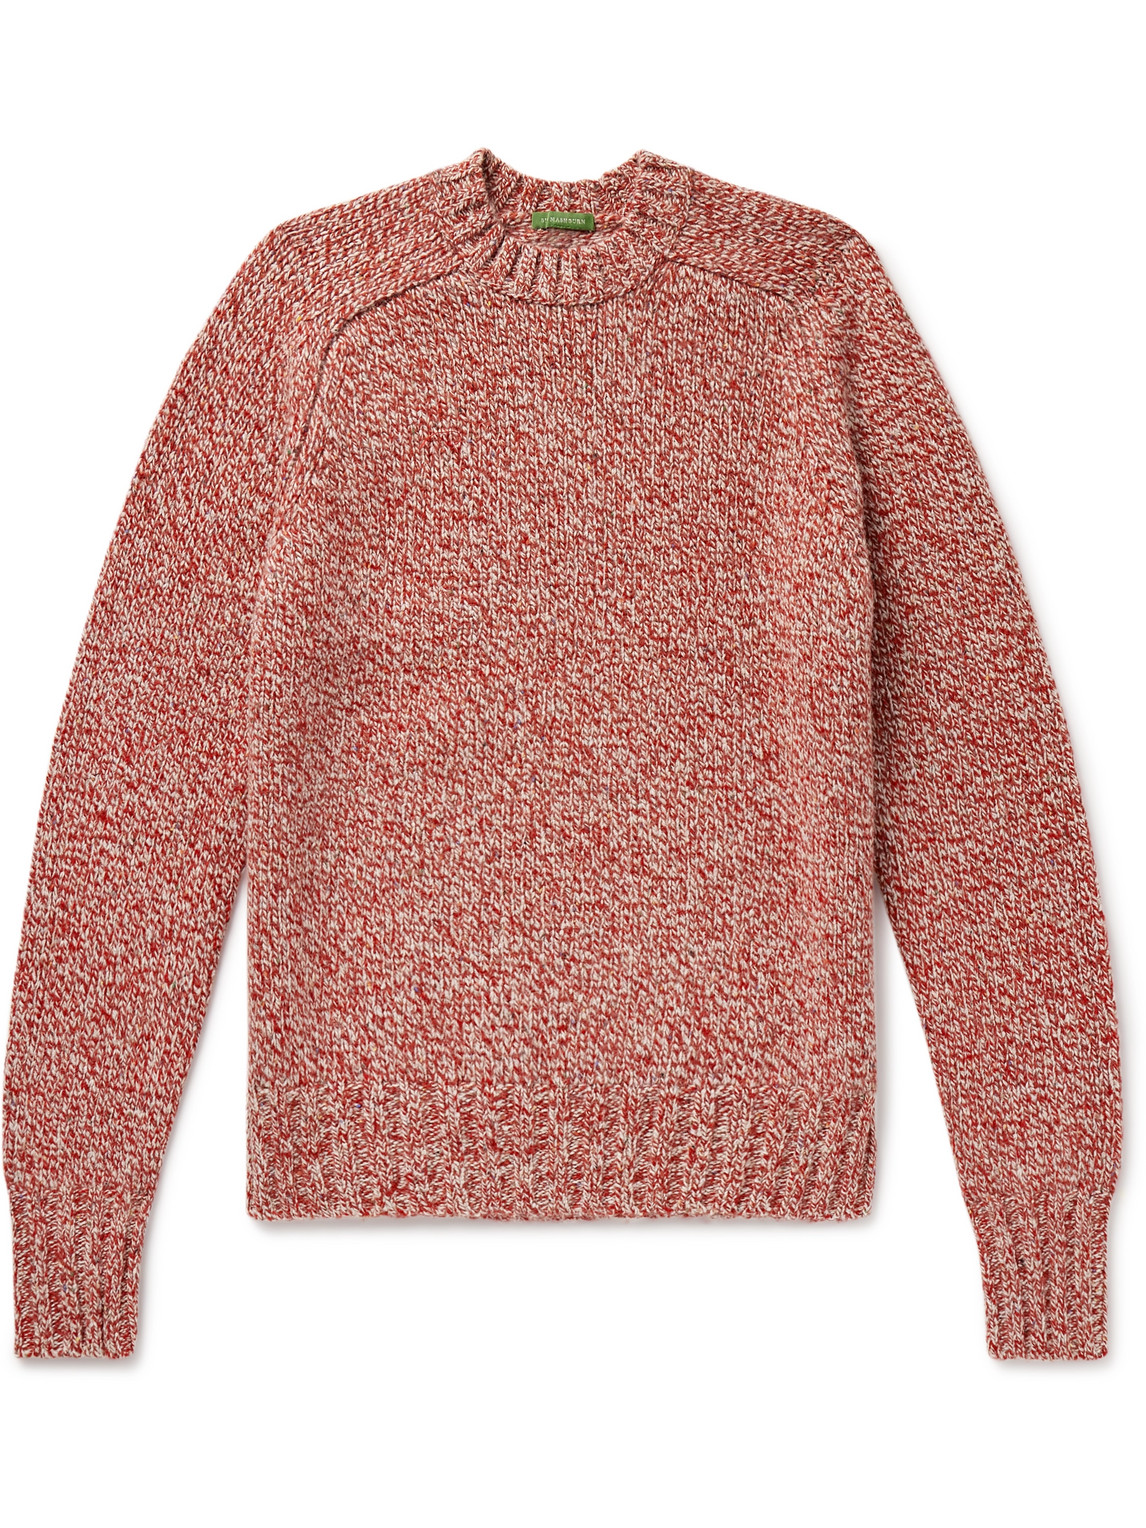 Mélange Knitted Wool-Blend Sweater